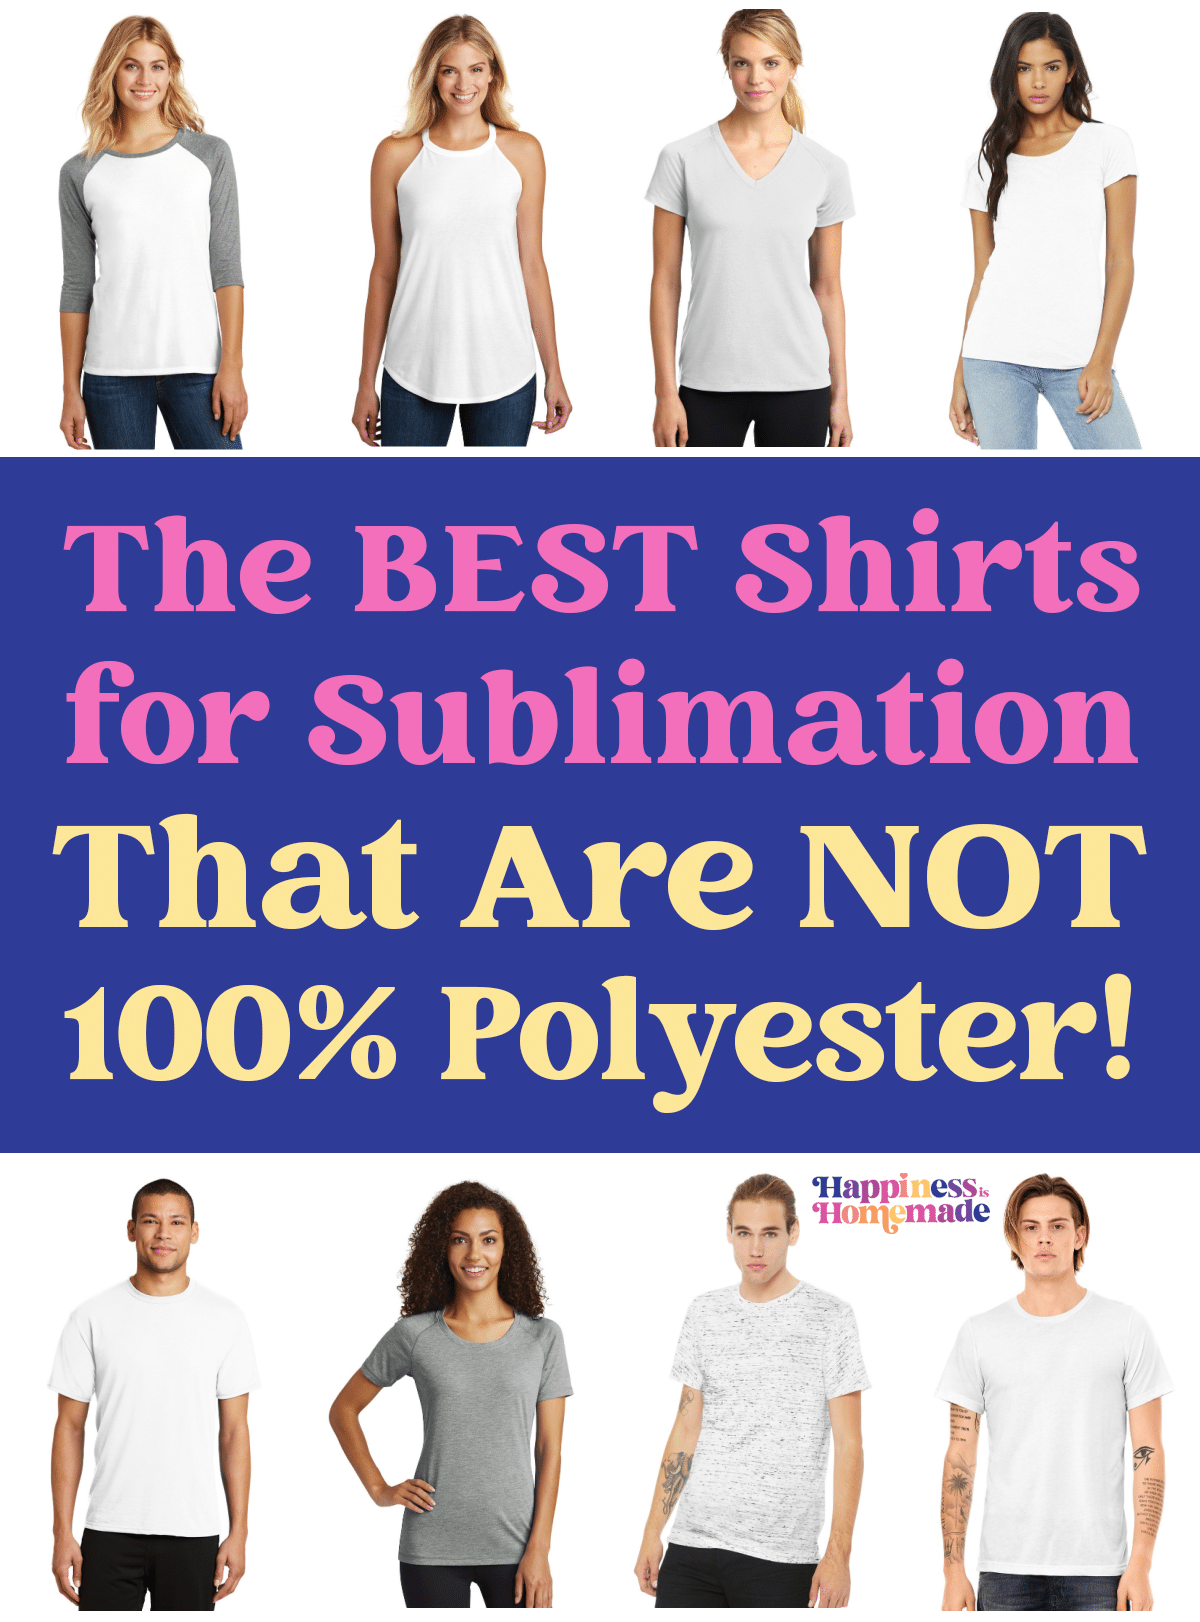 SUBLIMATION ON 50/50 COTTON POLY BLEND T-SHIRTS (how to do